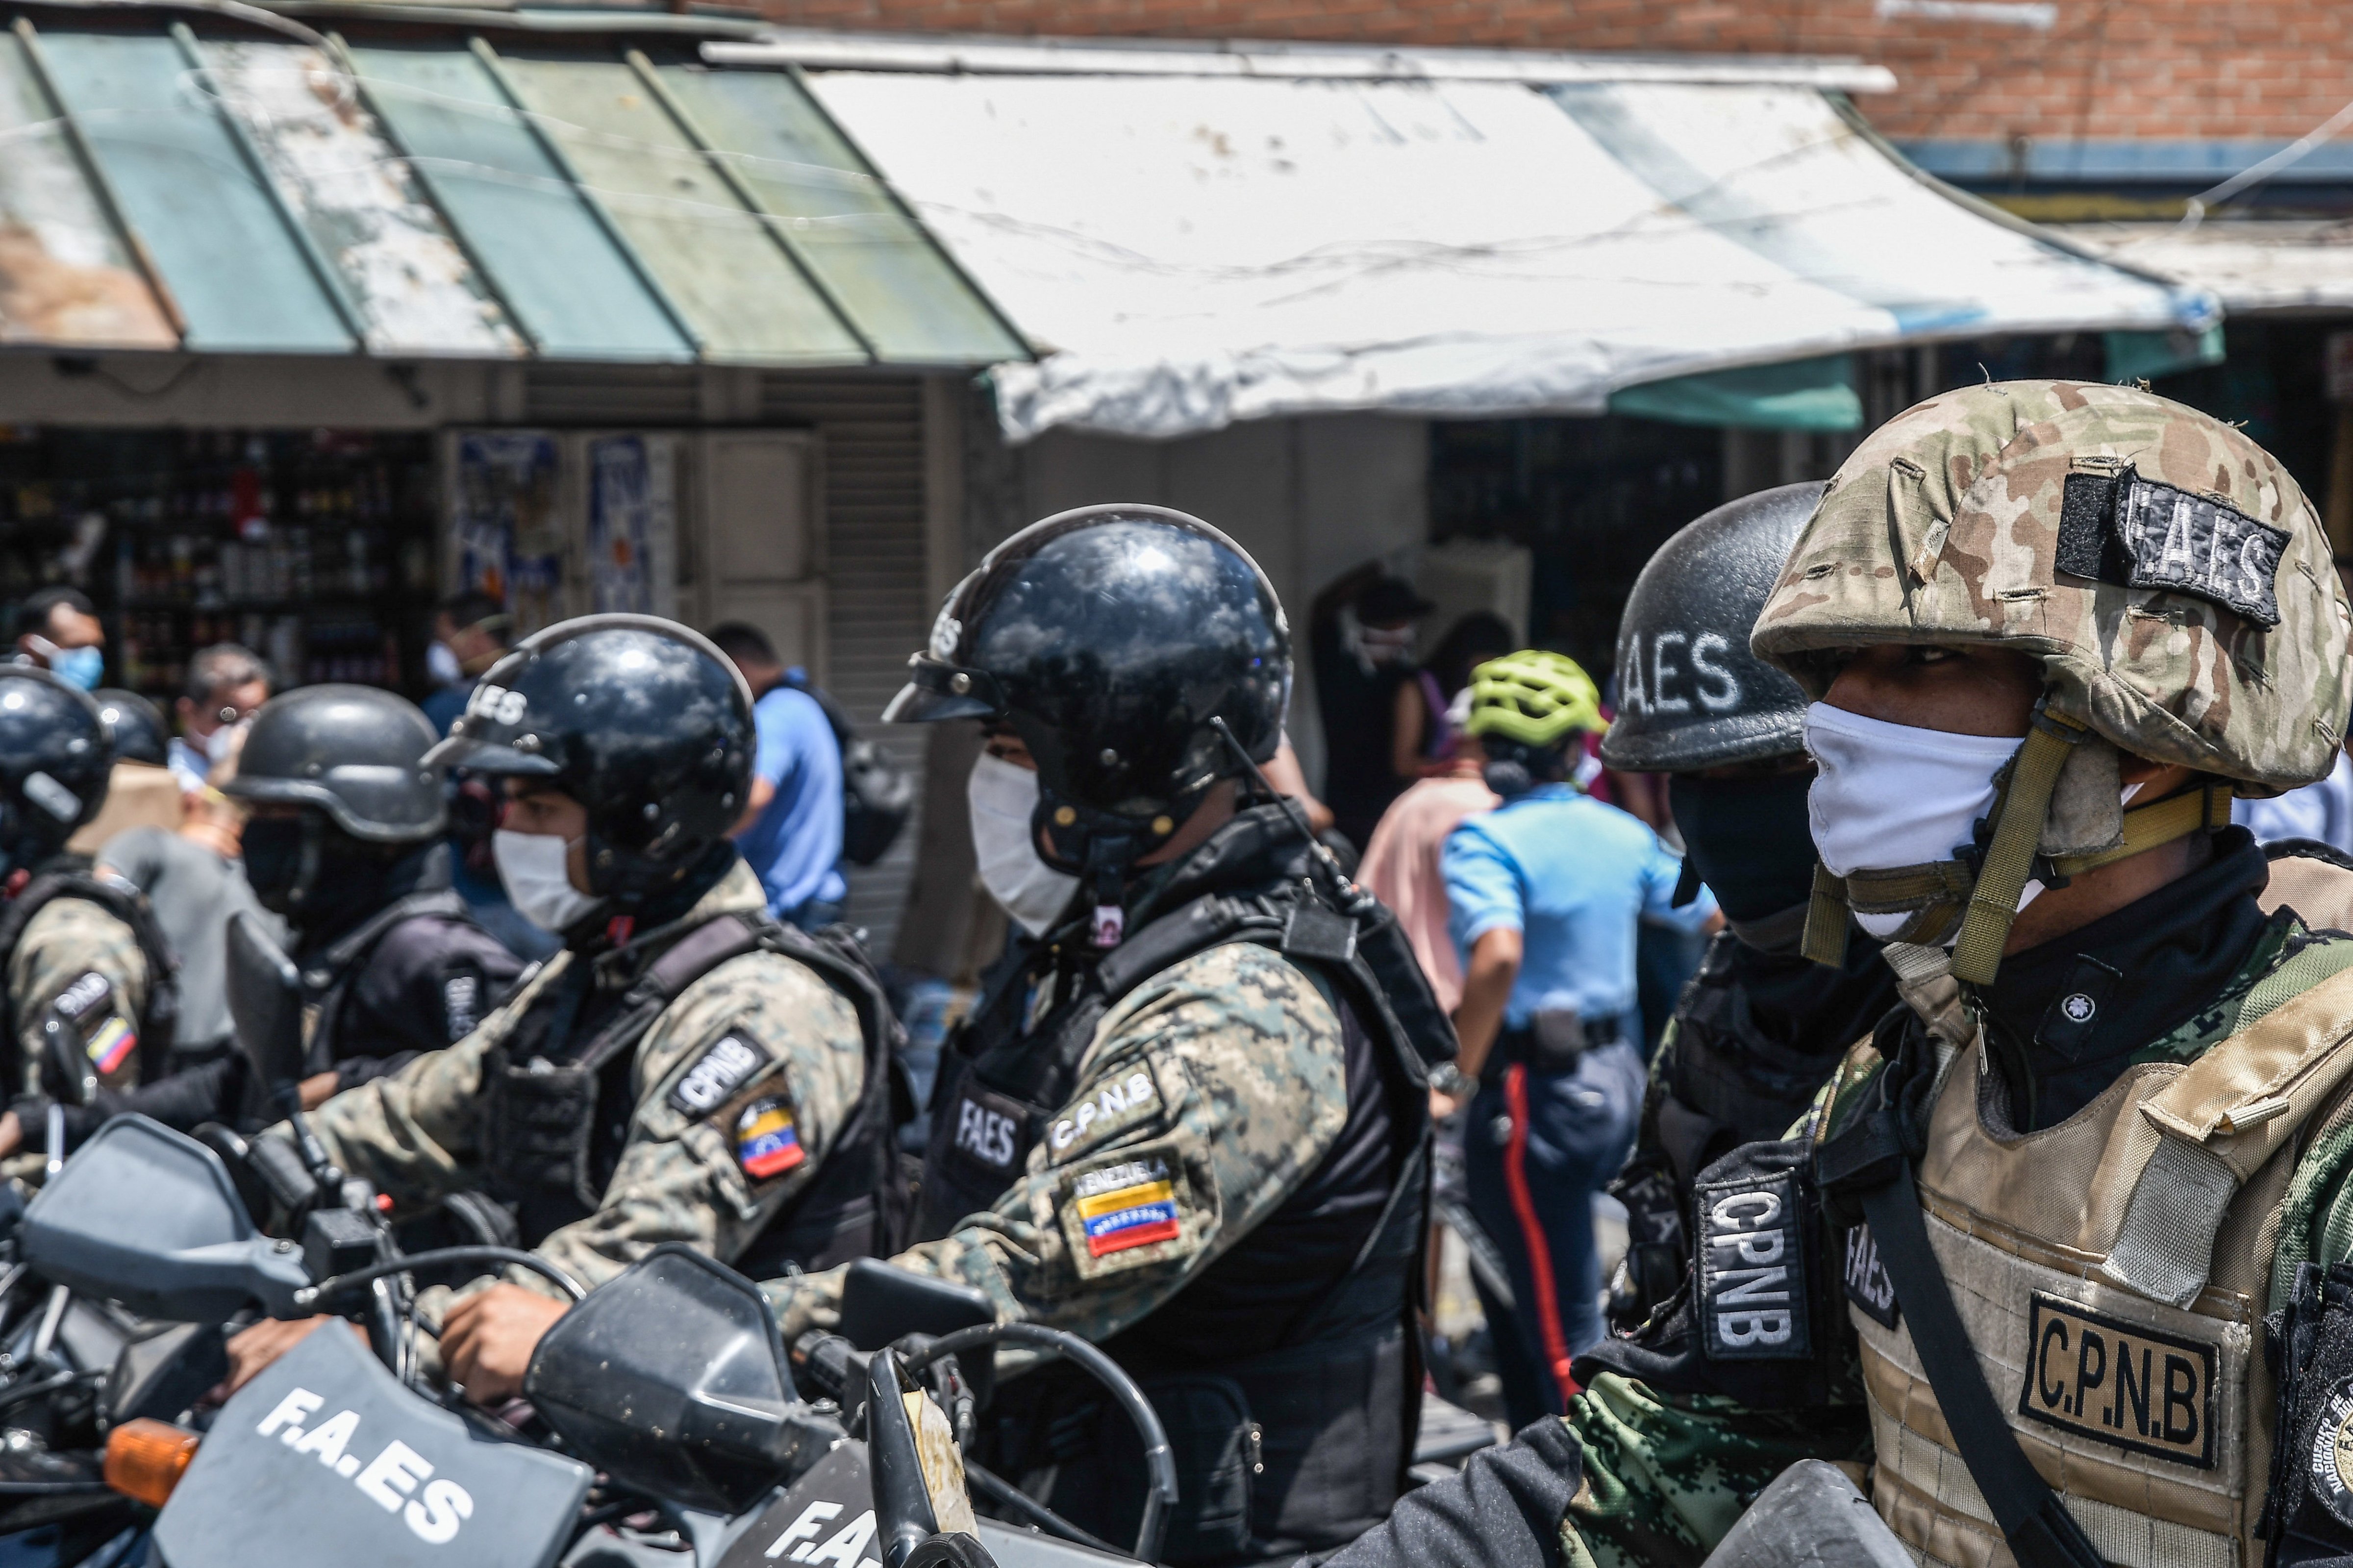 Police officers in Caracas, Venezuela enforce Nicolás Maduro's nationwide quarantine order to contain the coronavirus, on March 18, 2020. (Roman Camacho—SOPA Images/LightRocket/Getty Images)